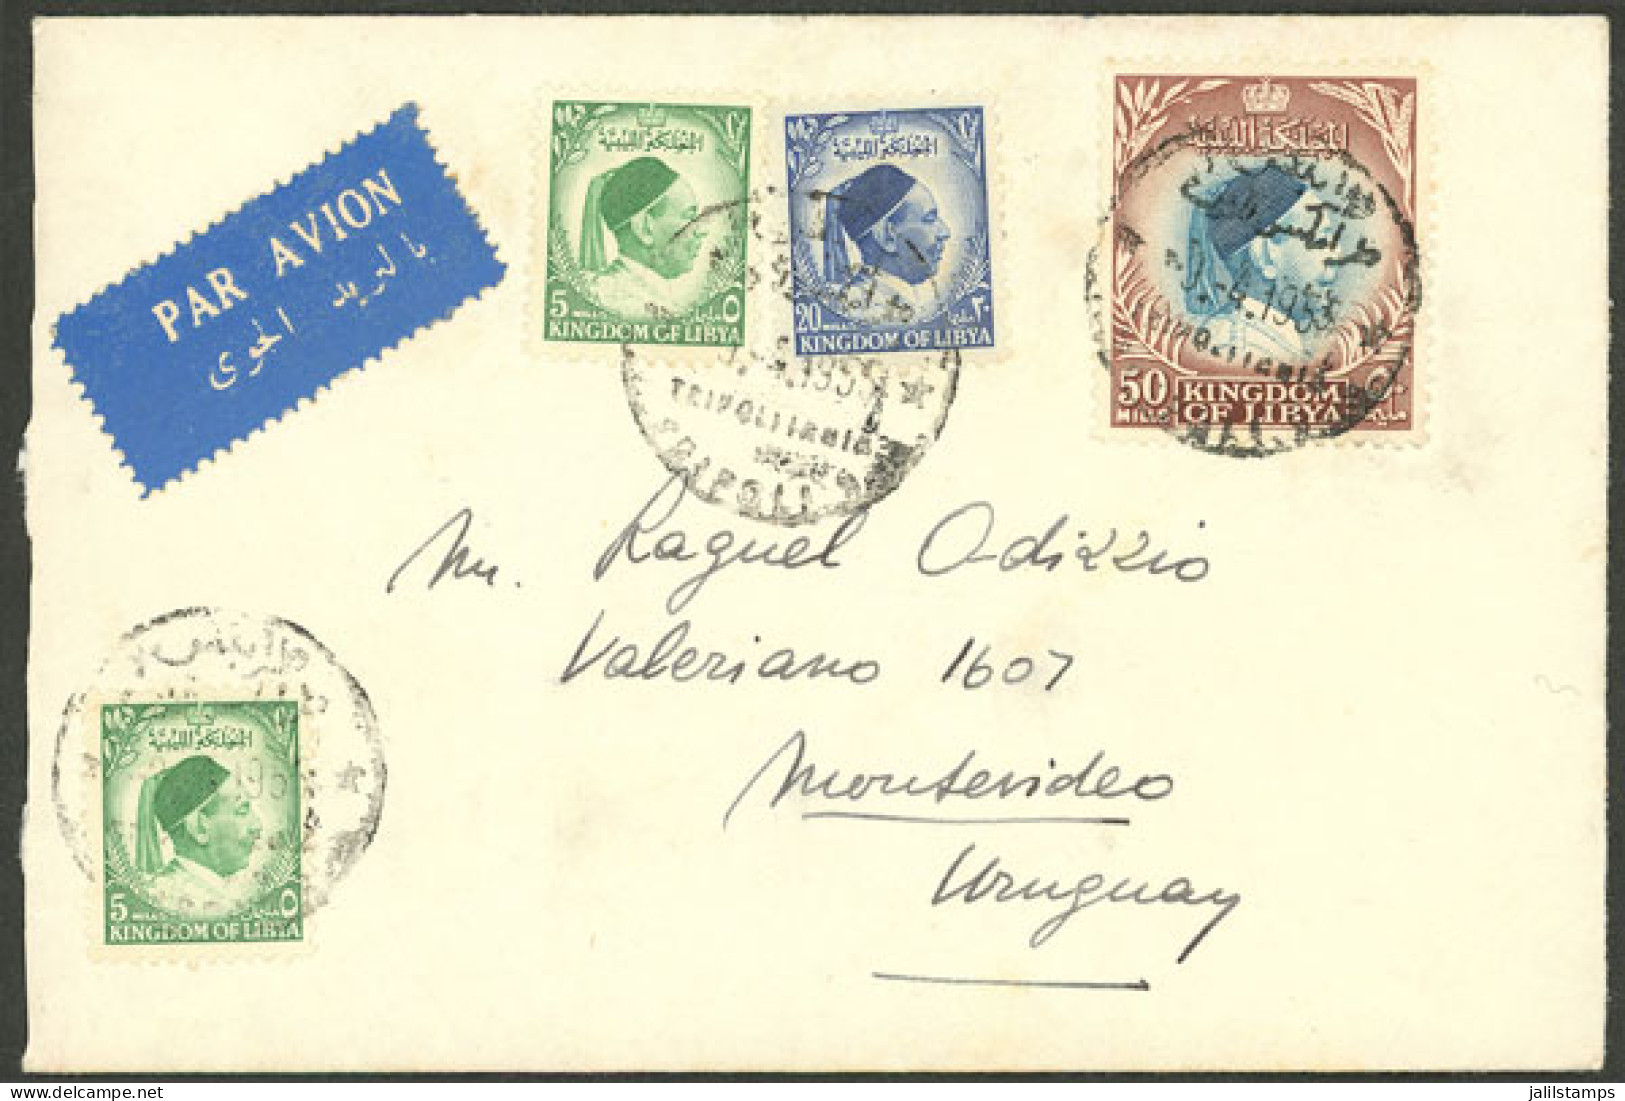 LIBYA: Airmail Cover Sent From Tripoli To Uruguay On 9/AP/1955, VF Quality! - Libya